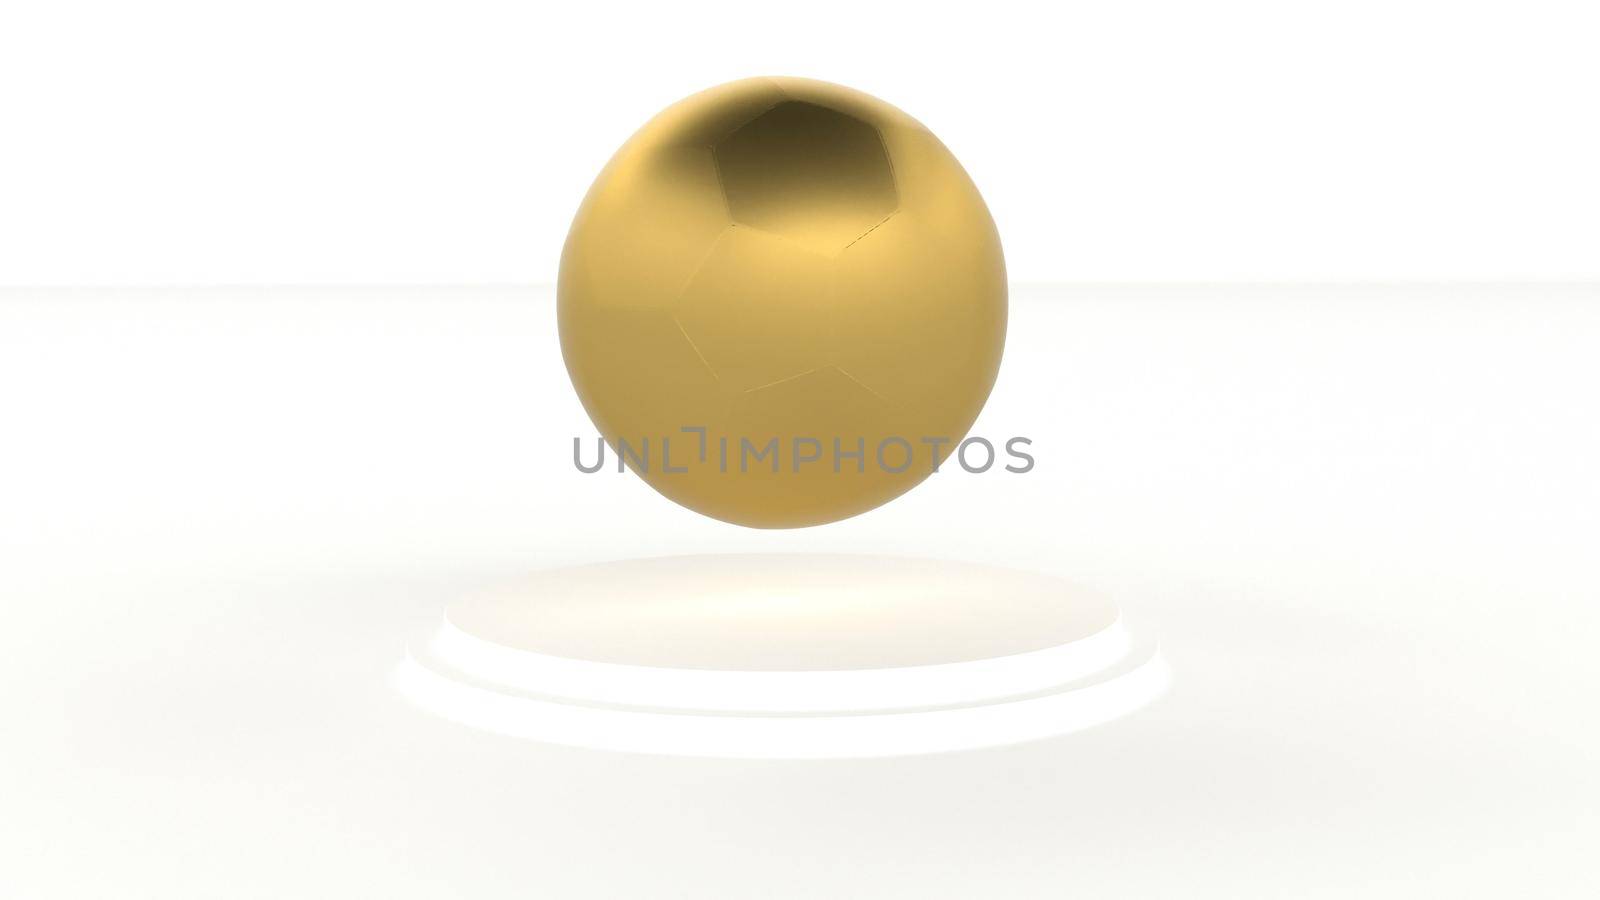 Yellow golden ball in 3d style on white pedestal 3d render